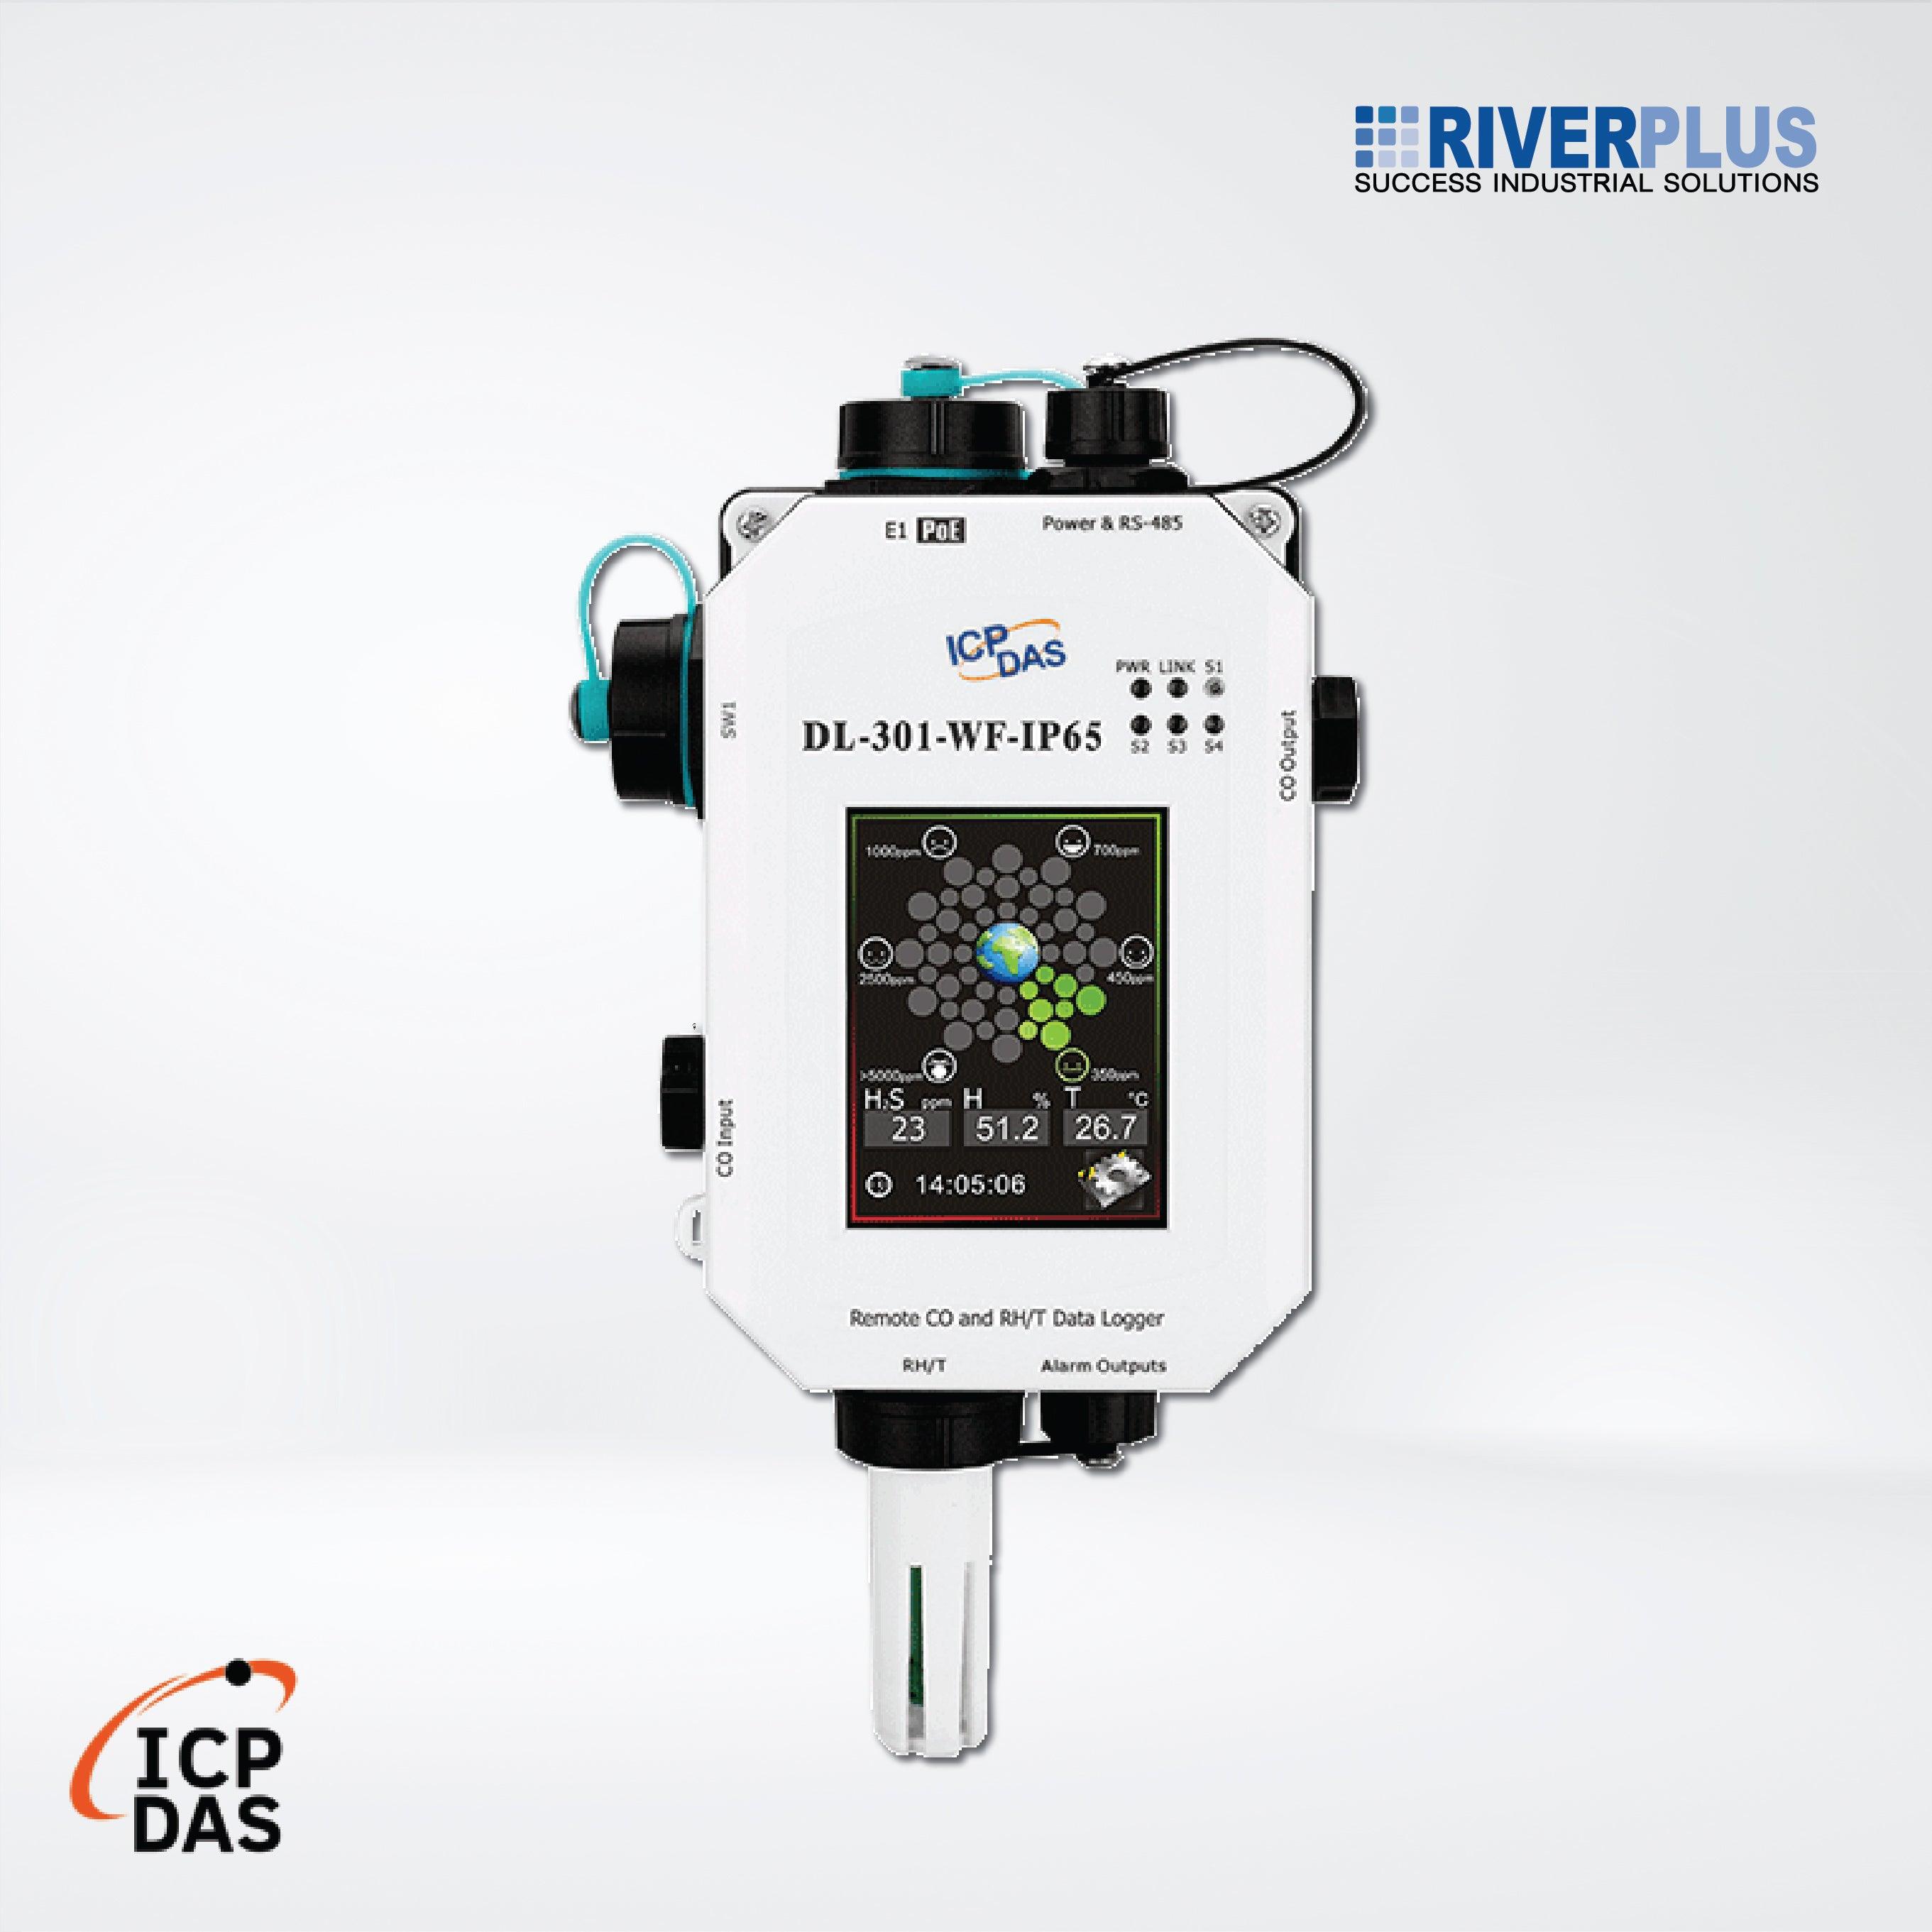 DL-301-WF-IP65 IP65 Remote CO/Temperature/Humidity/Dew Point Data Logger - Riverplus